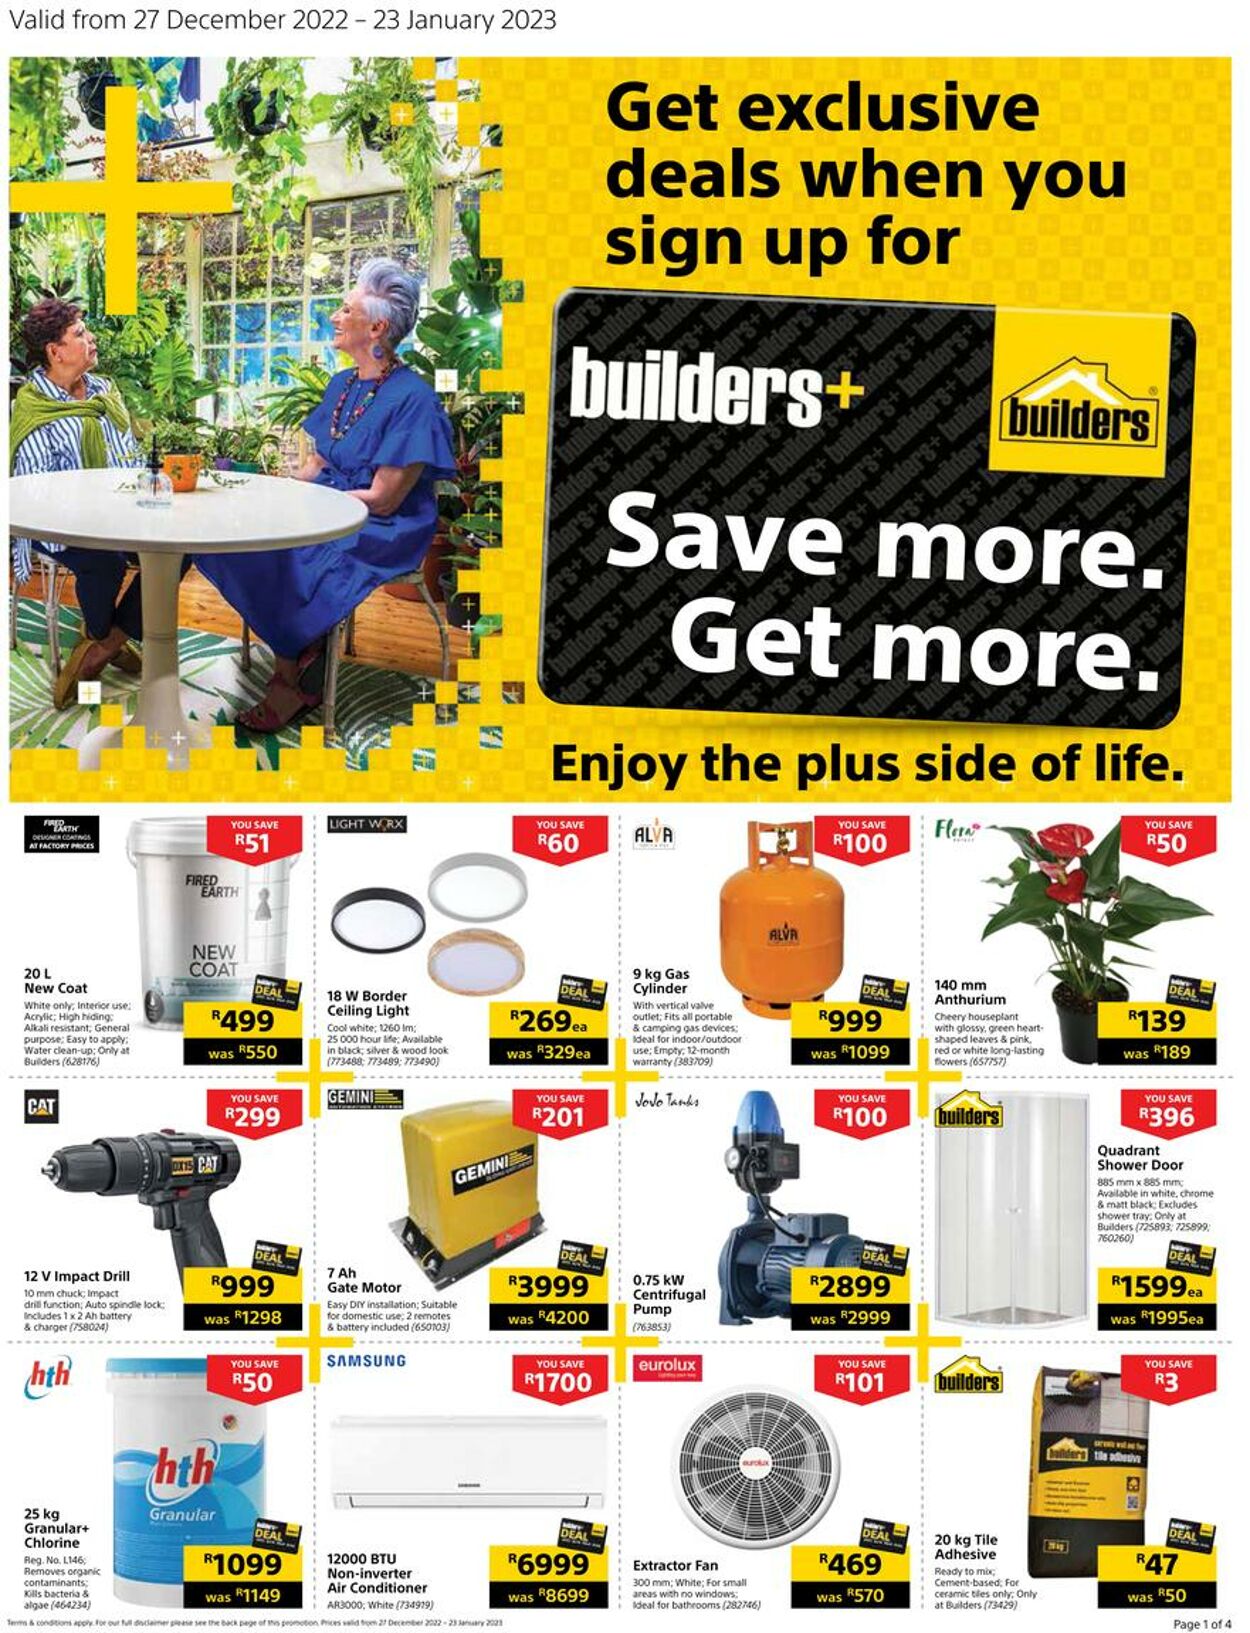 Special Builders Warehouse 27.12.2022 - 23.01.2023